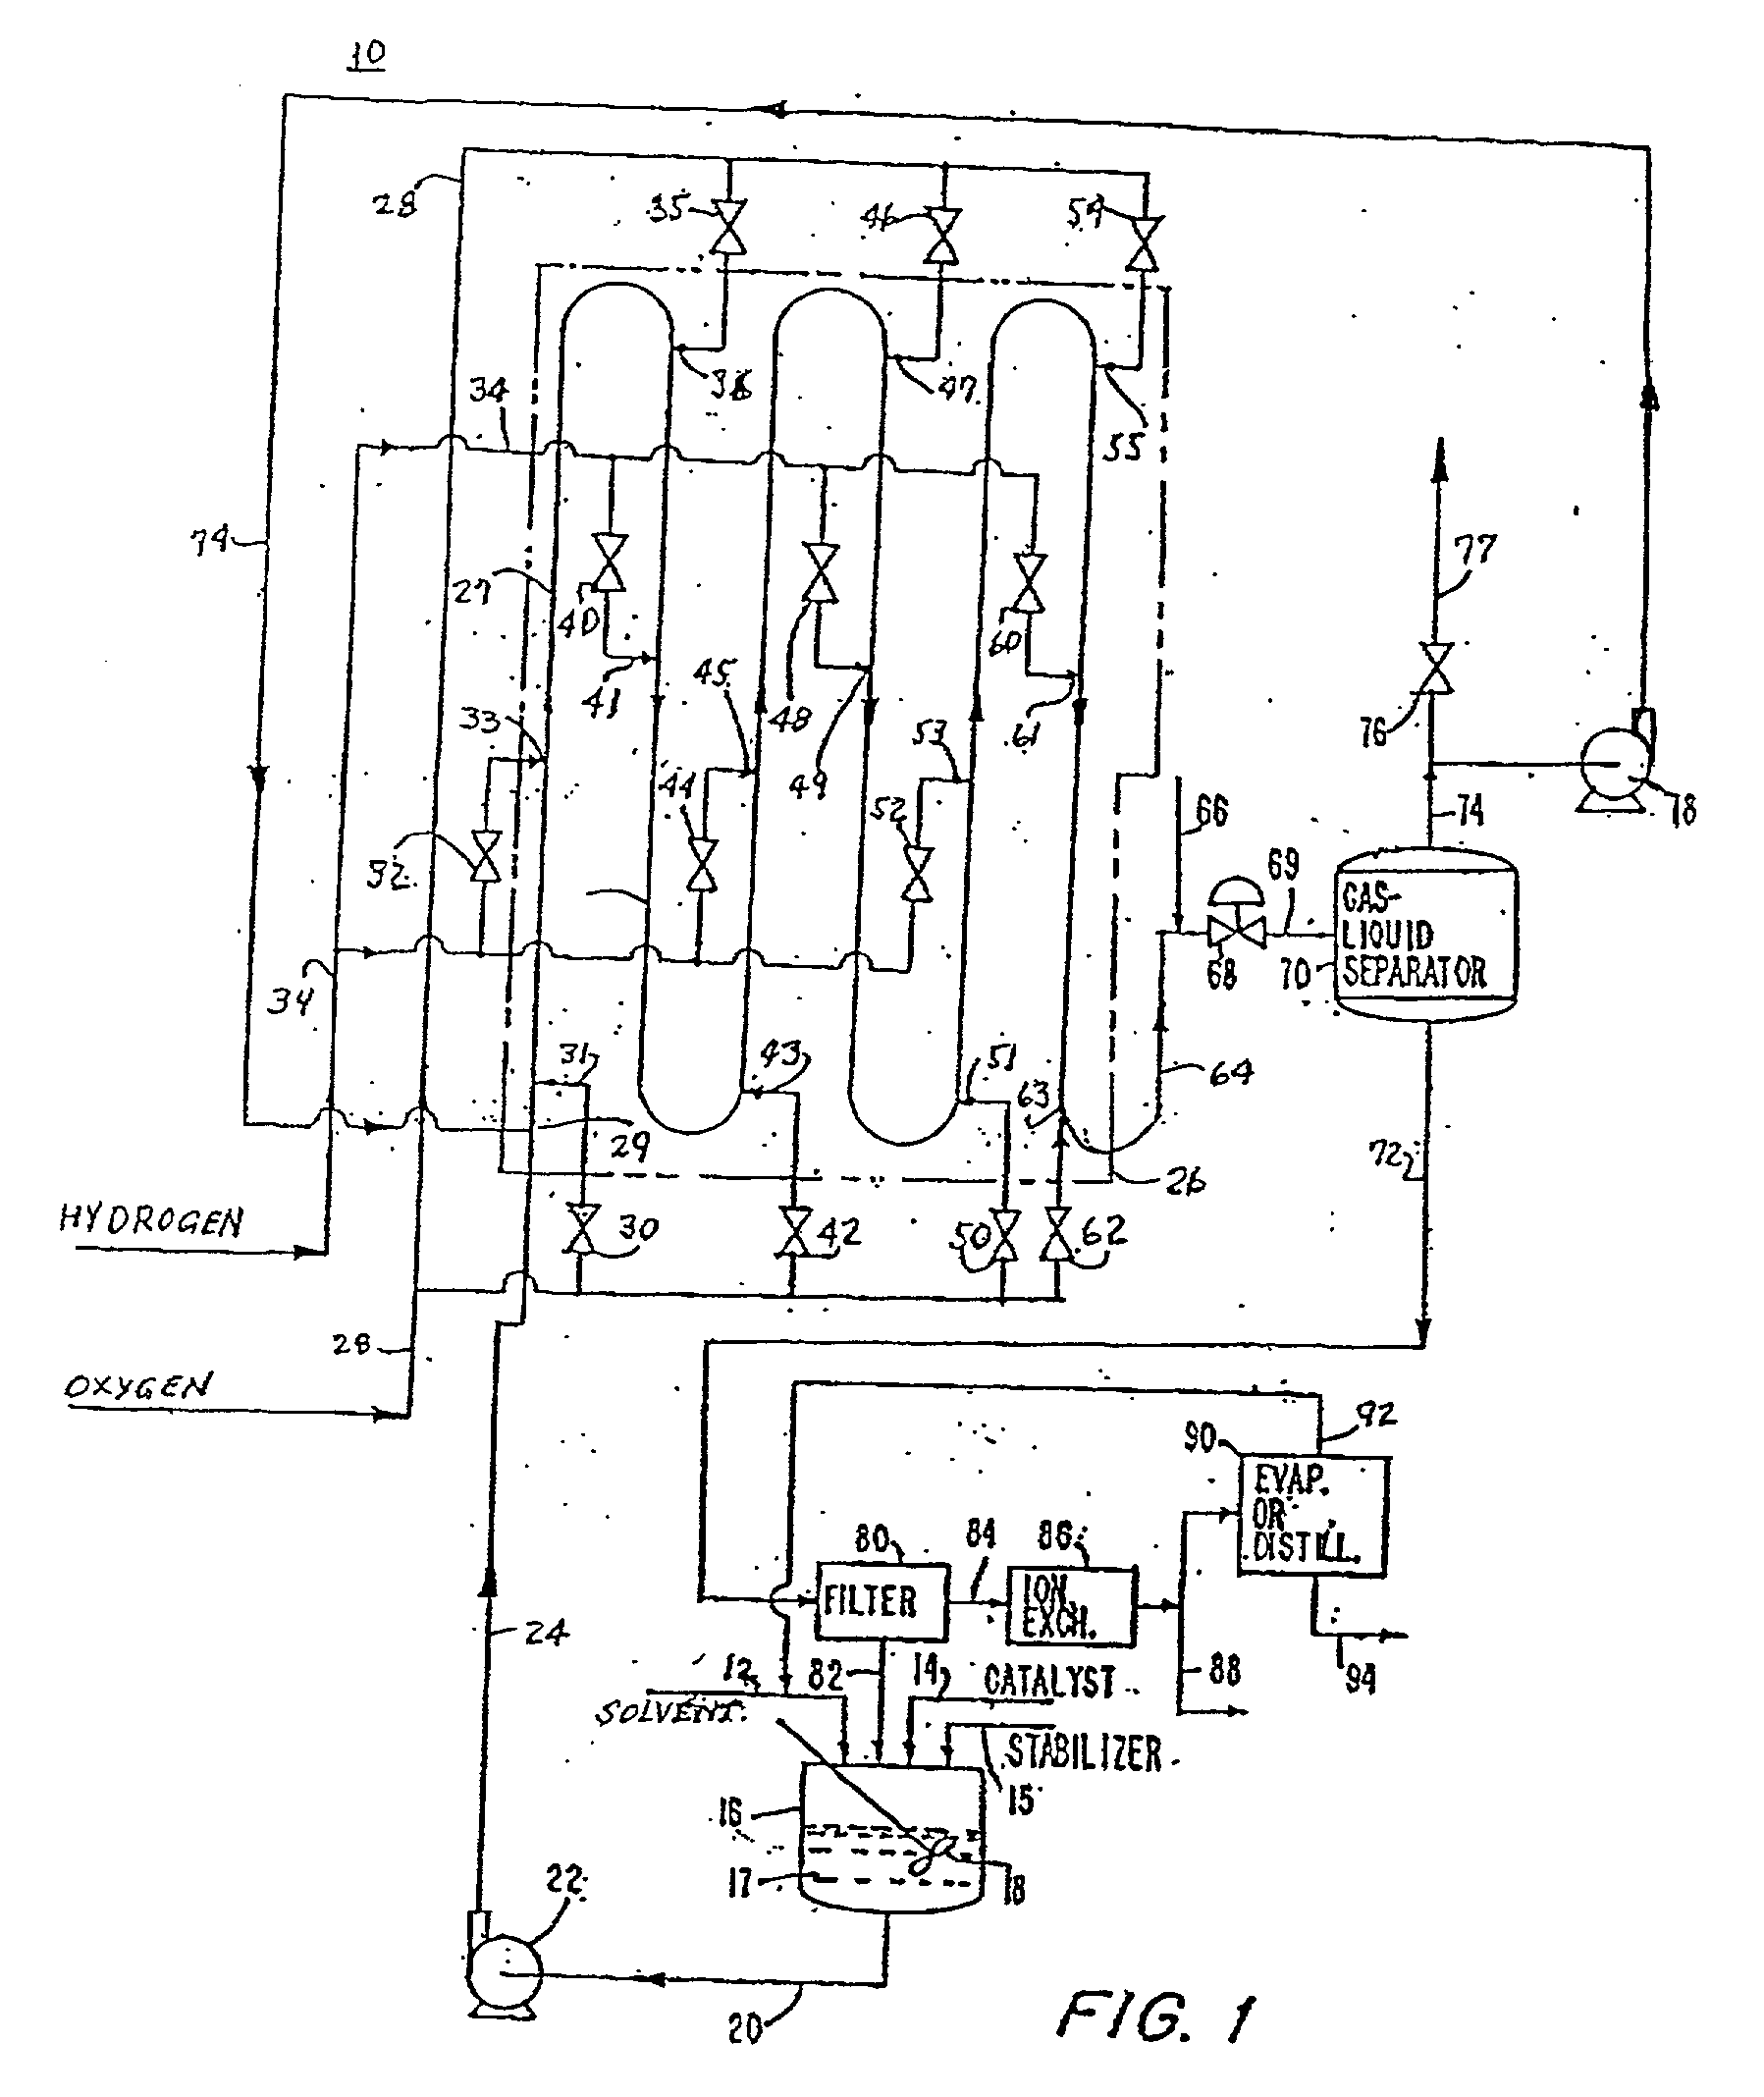 Method for producing hydrogen peroxide from hydrogen and oxygen